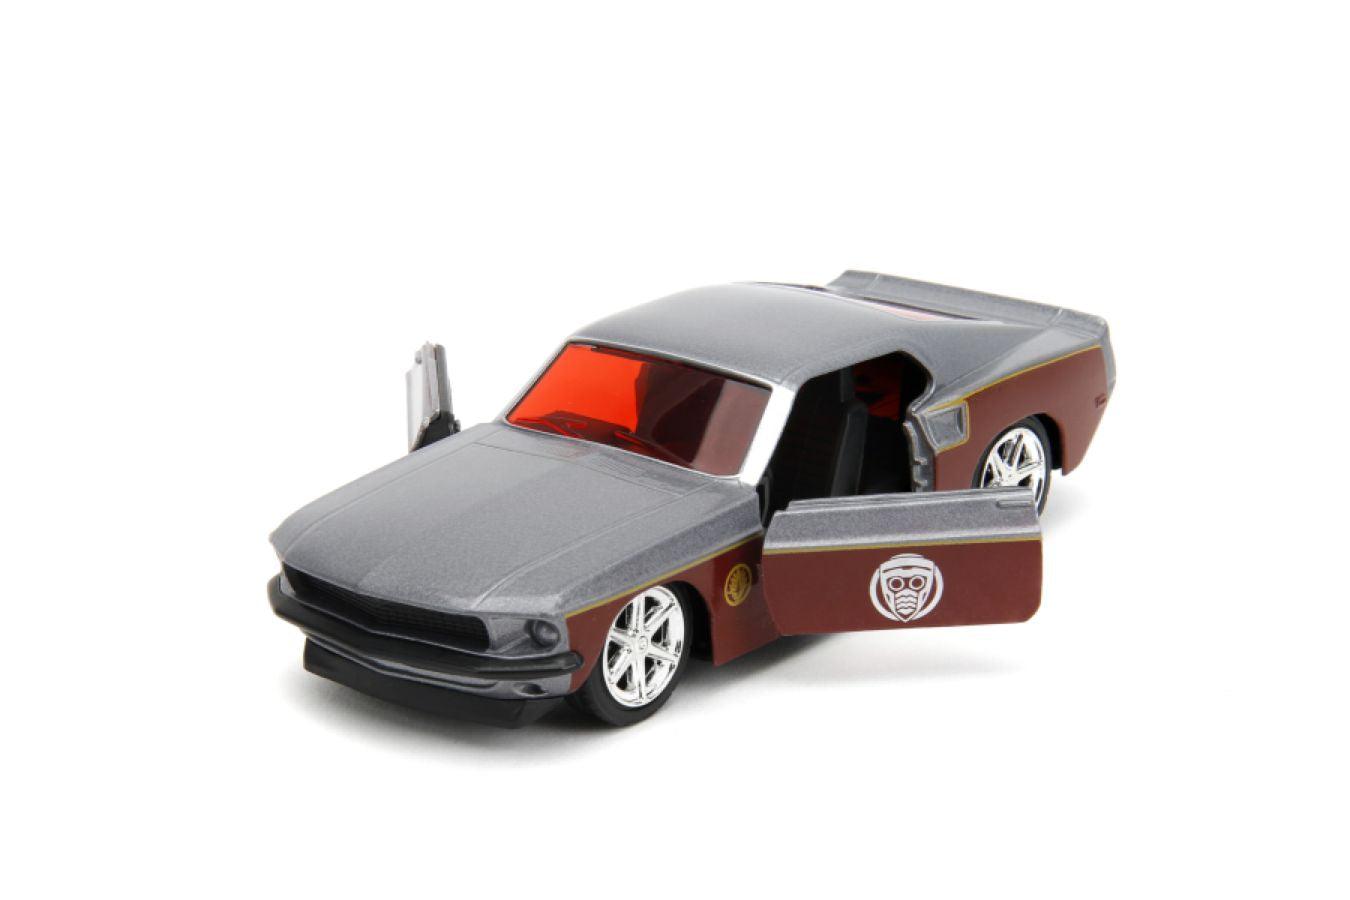 JAD33077 Marvel Comics - 1969 Ford Mustang Fastback 1:32 Scale Vehicle with Star Lord Figure - Jada Toys - Titan Pop Culture